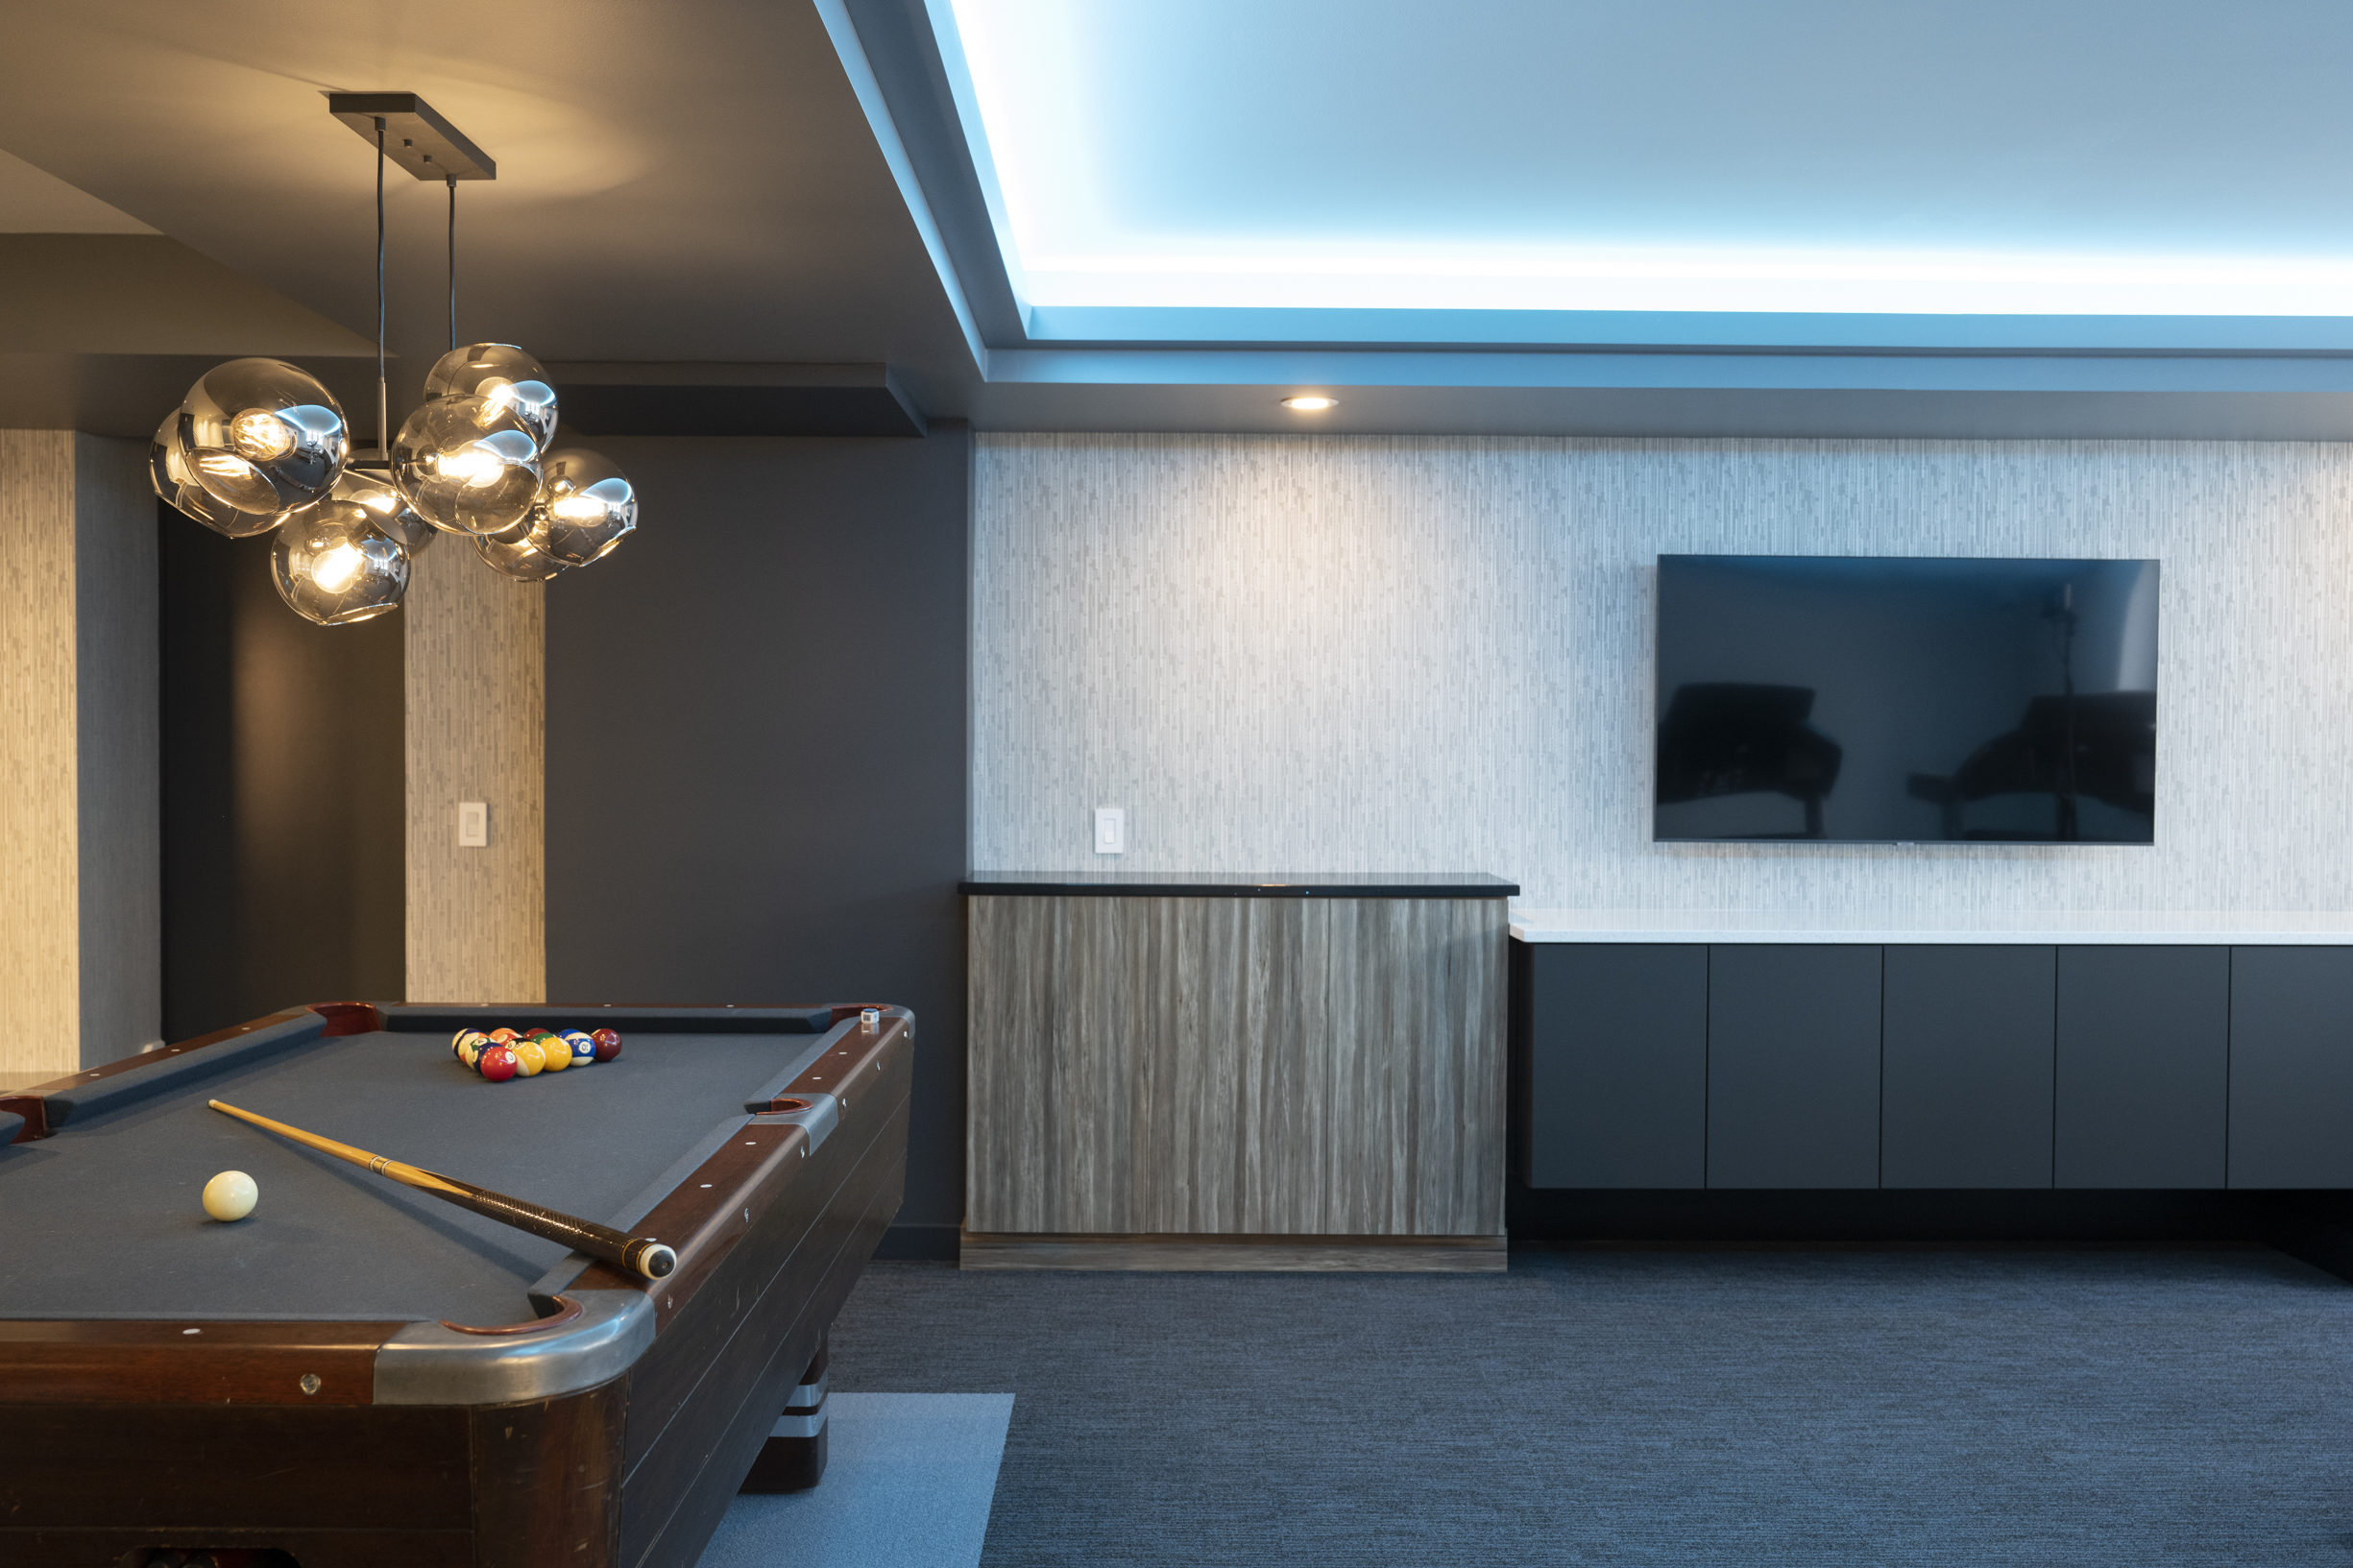 basement remodel with pool table, lights that change color along the ceiling, and unique, modern light fixture